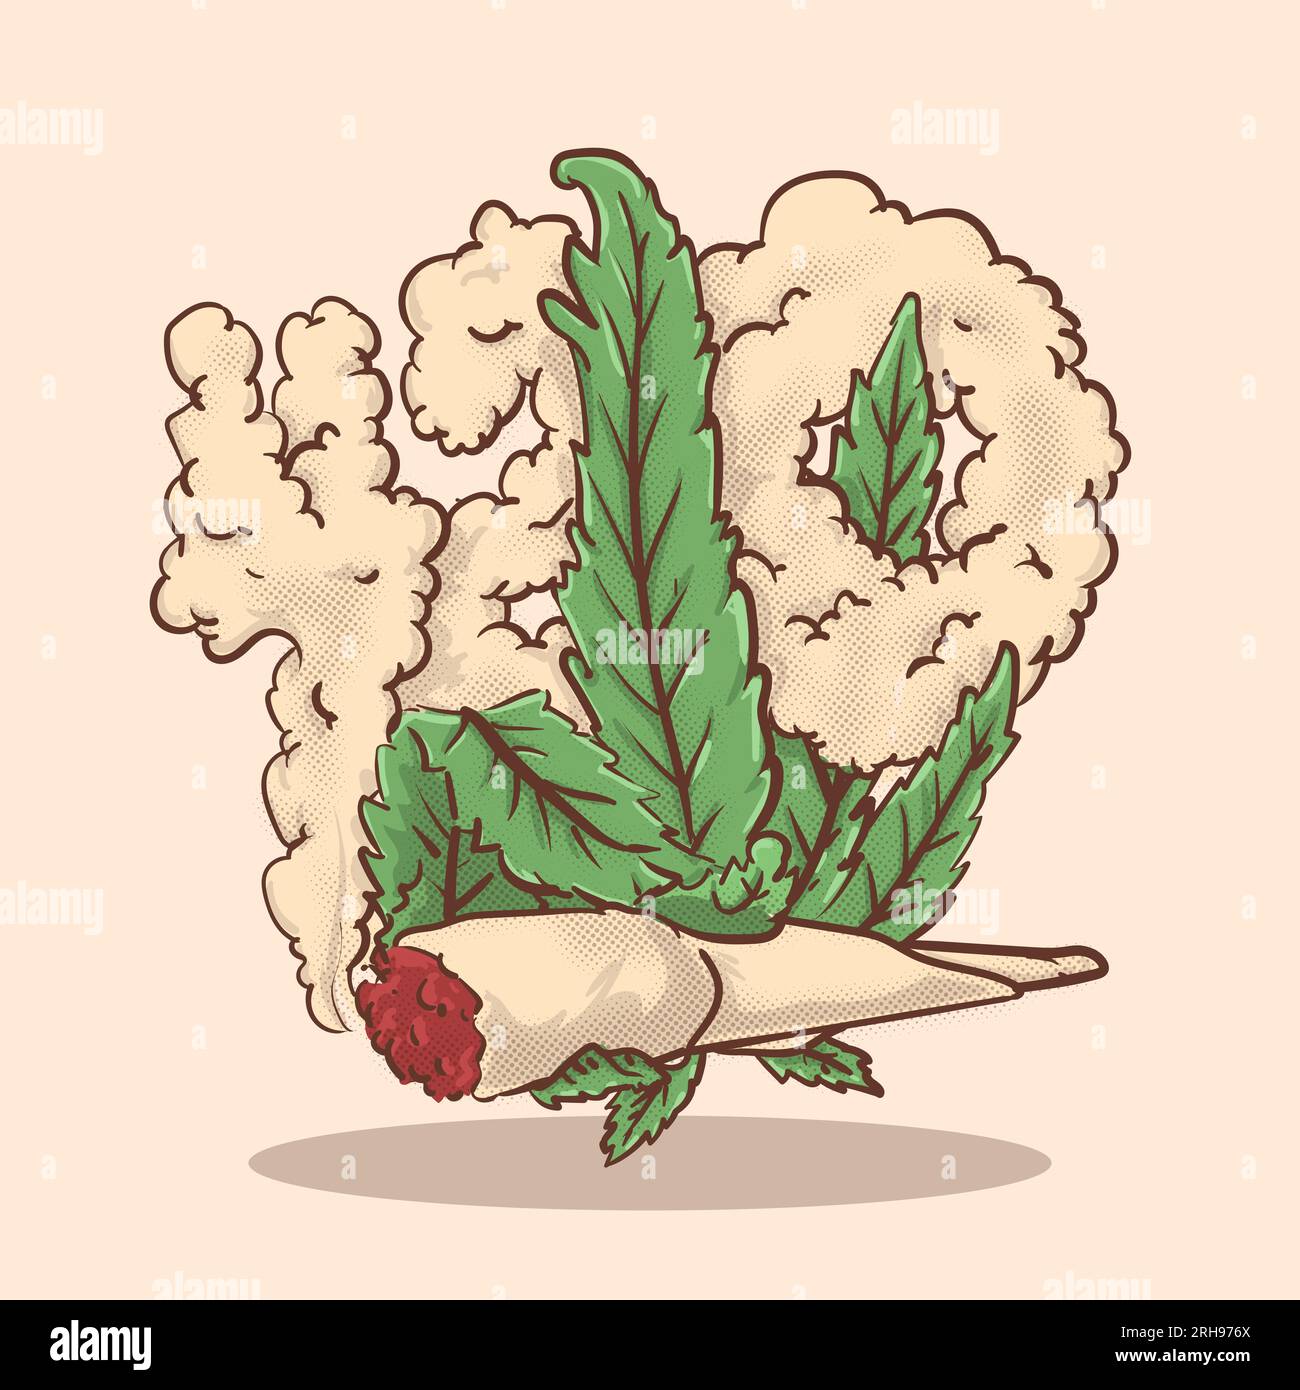 Happy Cannabis 420 Celebration Greeting Design With Hand Holding A